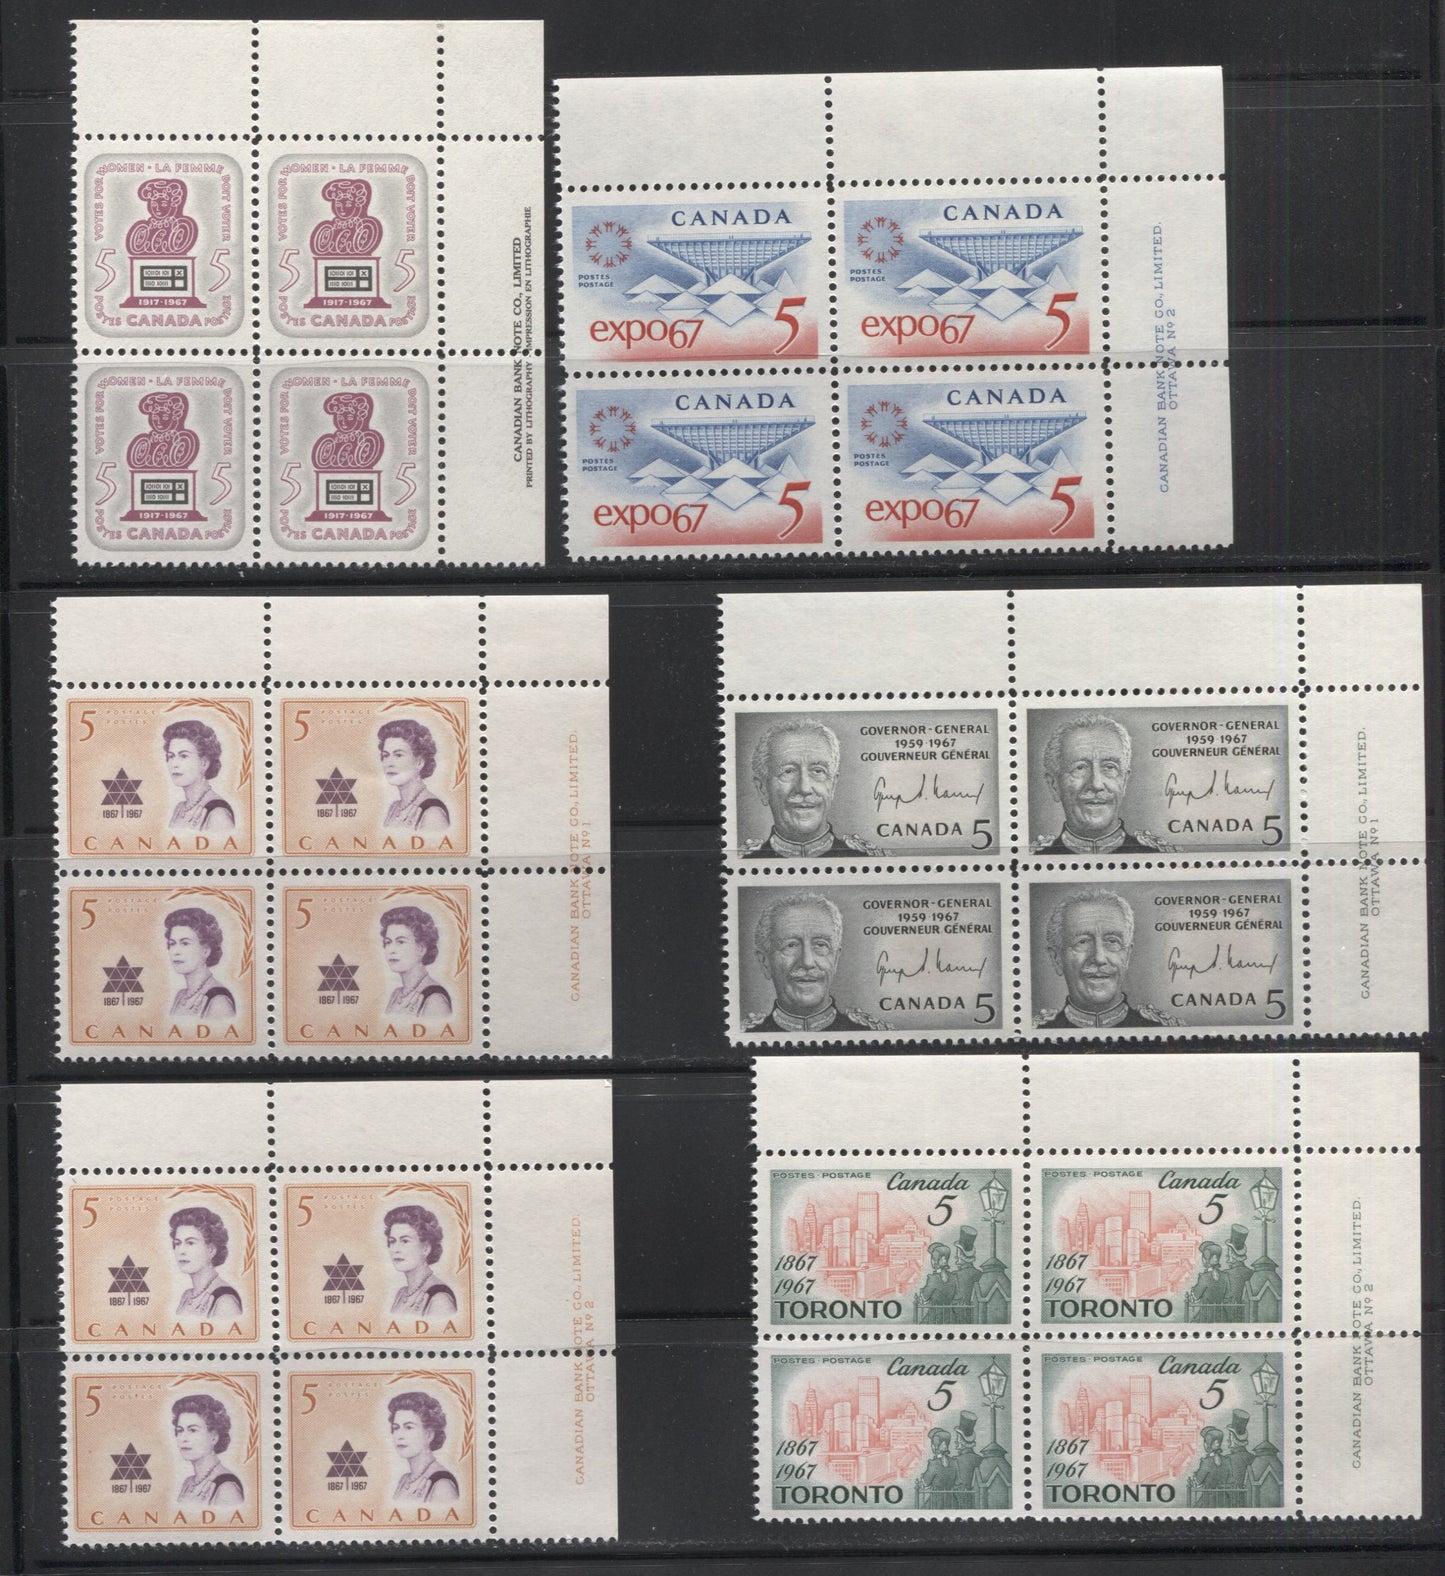 Lot 72 Canada #469-475 5c Blue And Red - Slate Green & Salmon Pink Katimavik - View Of Modern Toronto, 1967 Commemoratives, 11 VFNH UR Plate 1-2 Blocks Of 4 On Dull and DF-fl, Fluorescent Papers